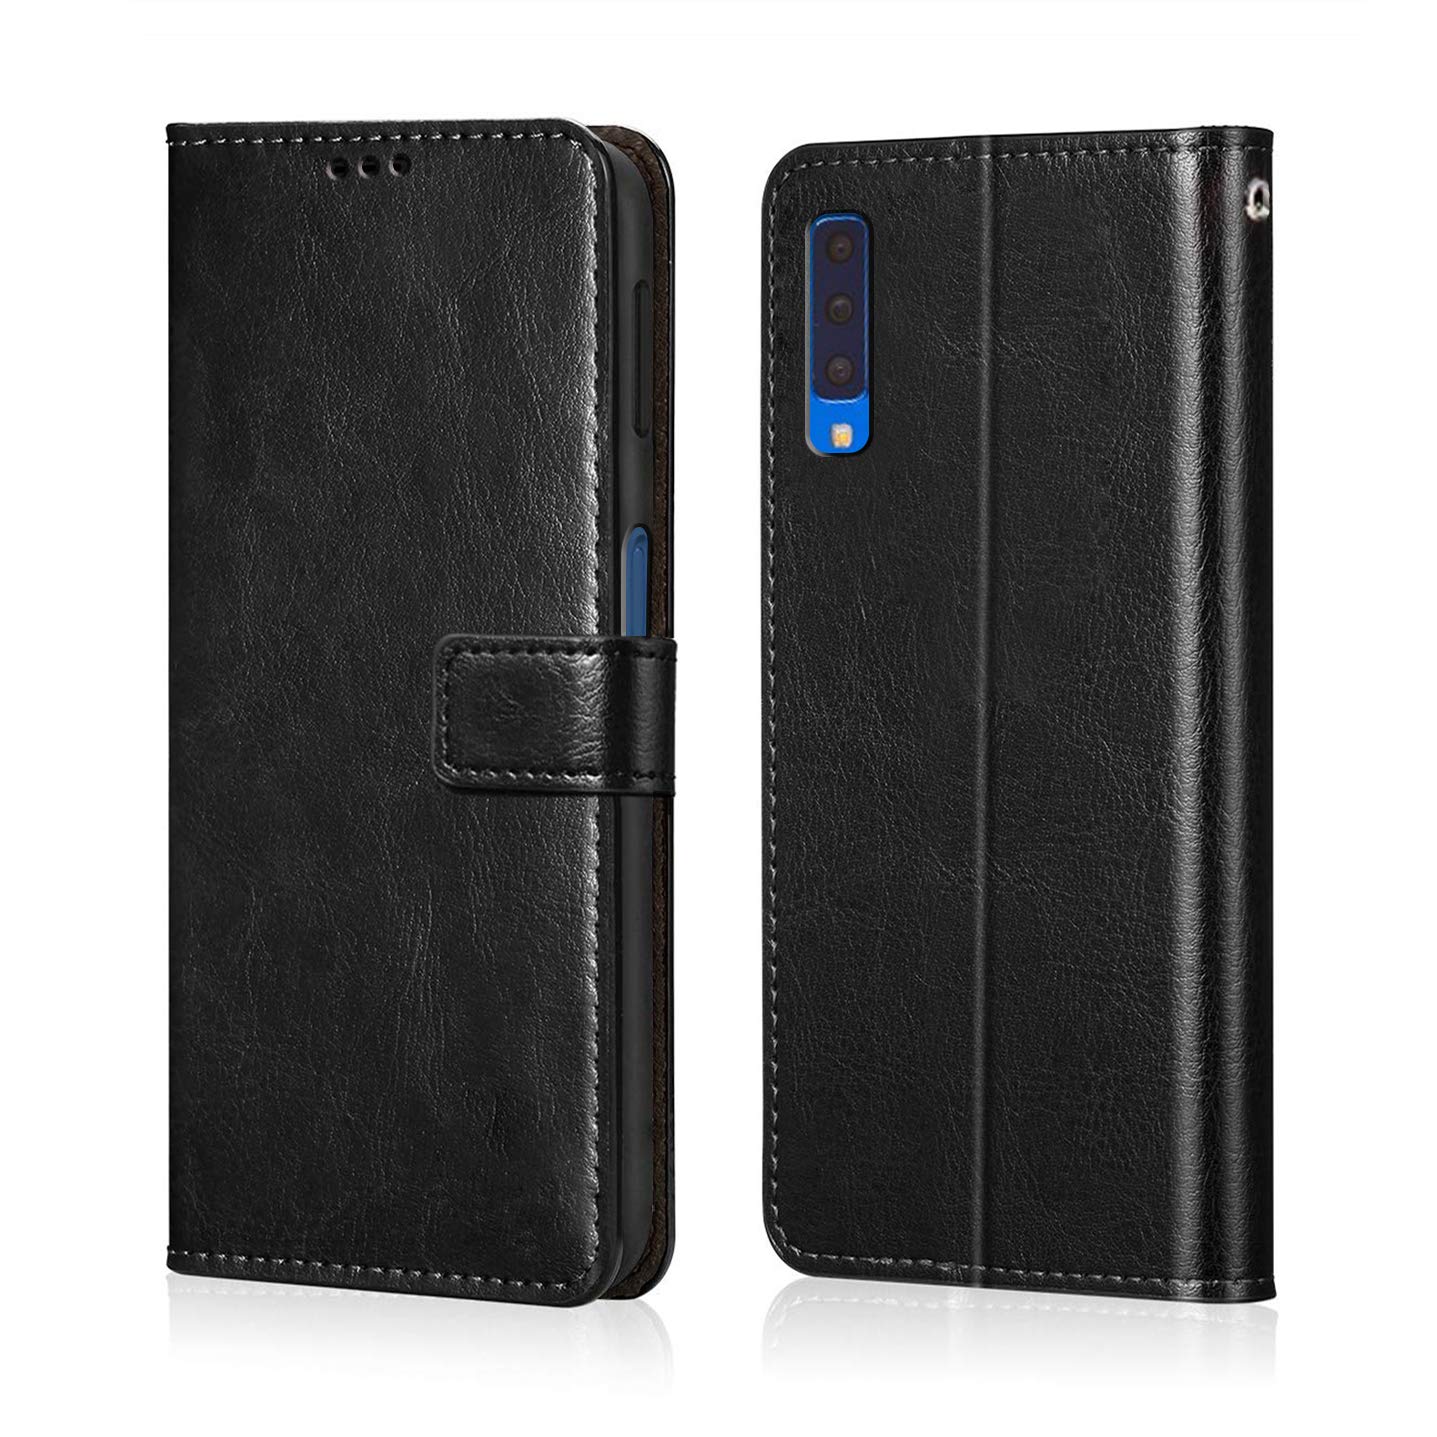 Samsung Galaxy A7 2018 Leather Flip Cover